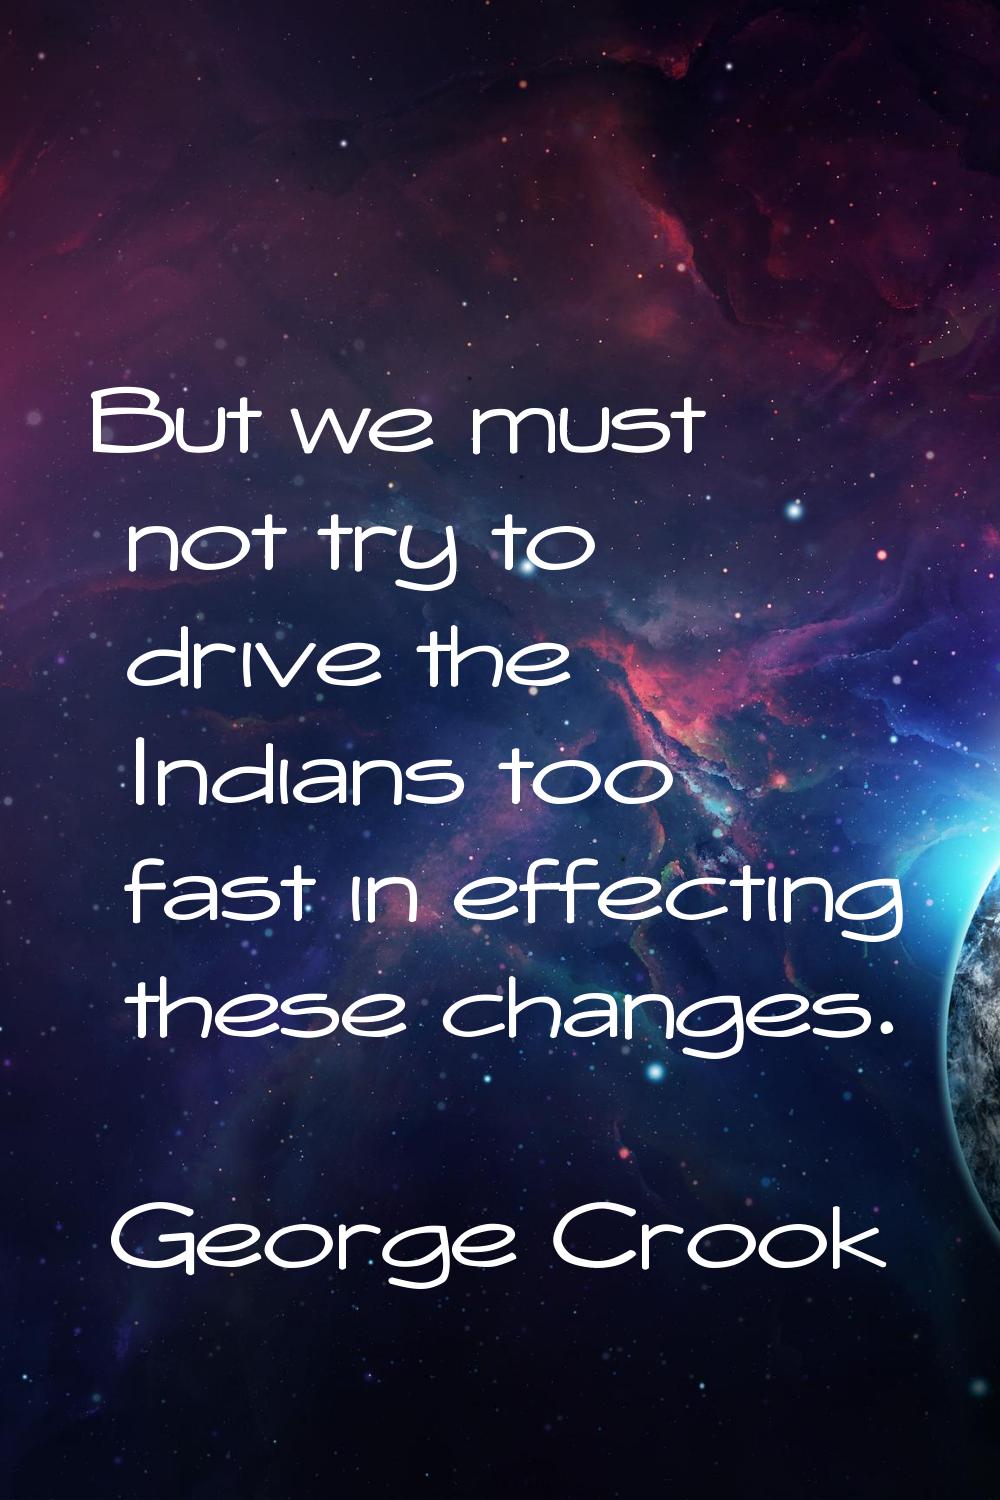 But we must not try to drive the Indians too fast in effecting these changes.